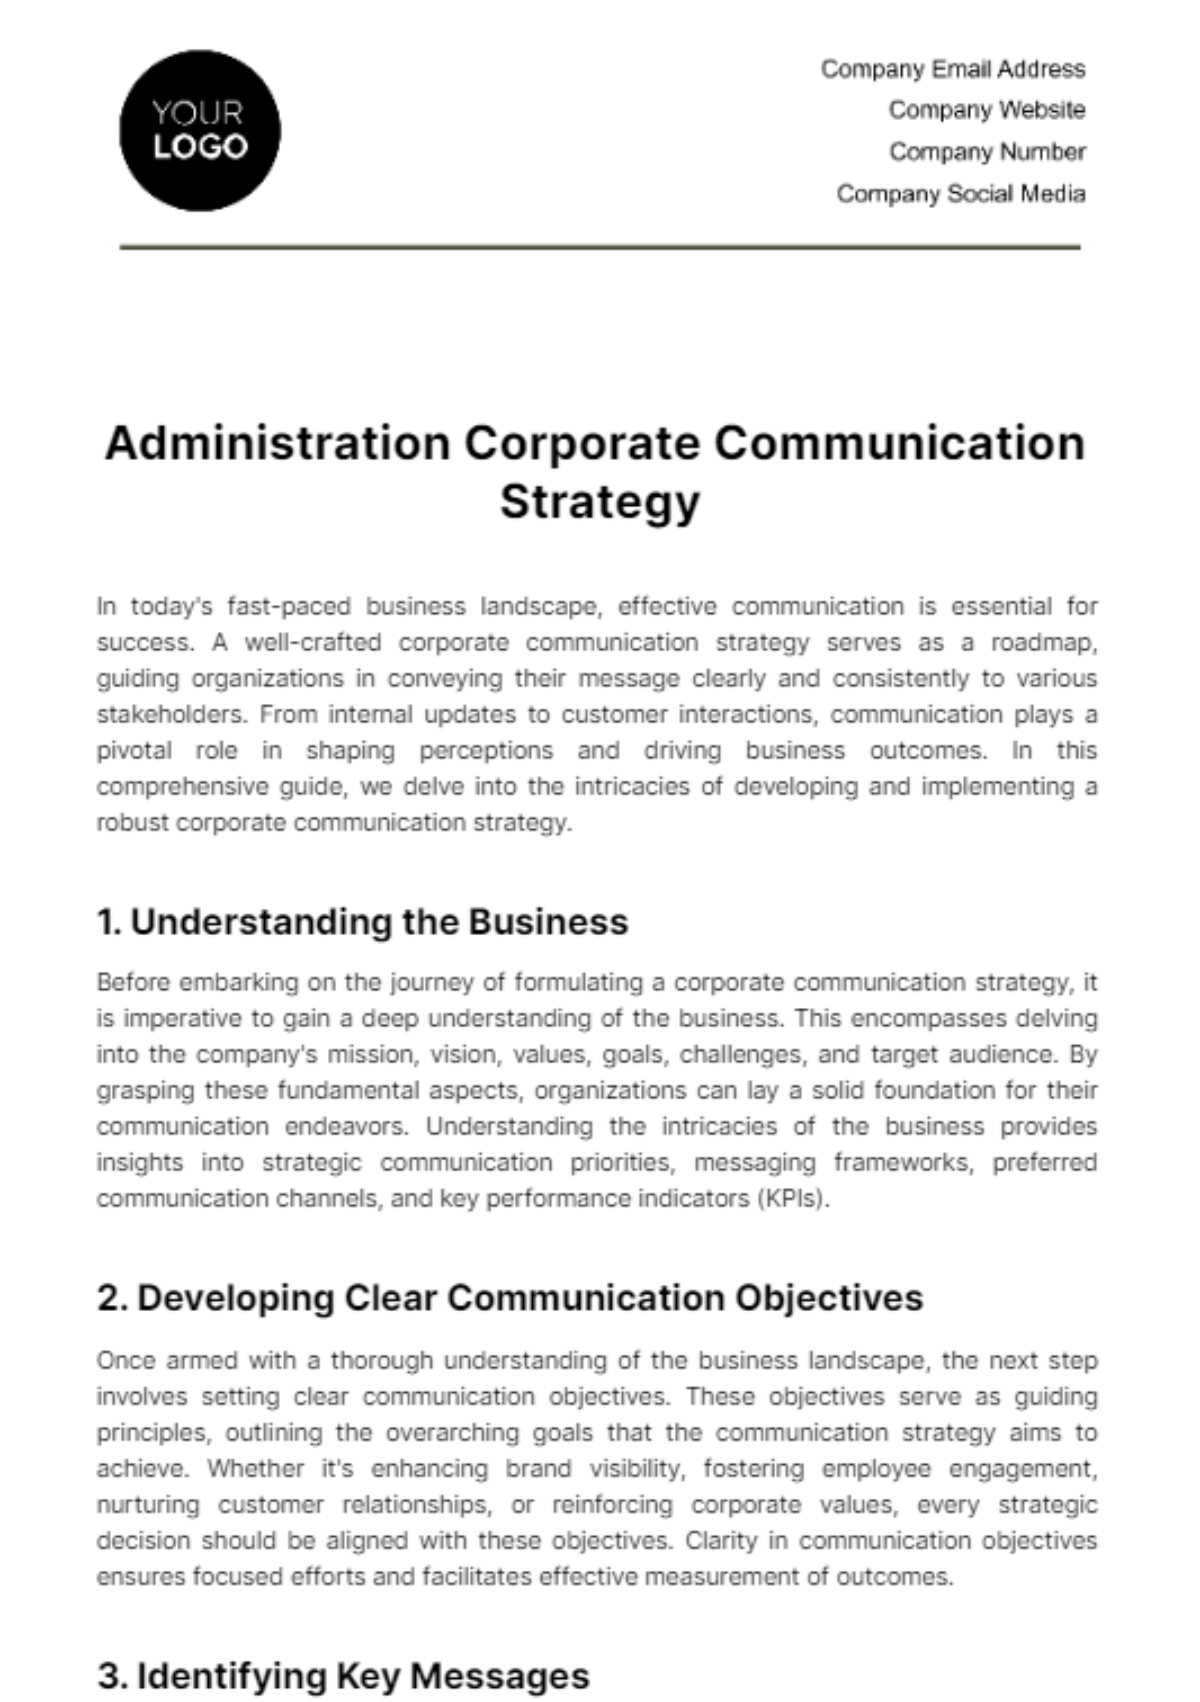 Administration Corporate Communication Strategy Template